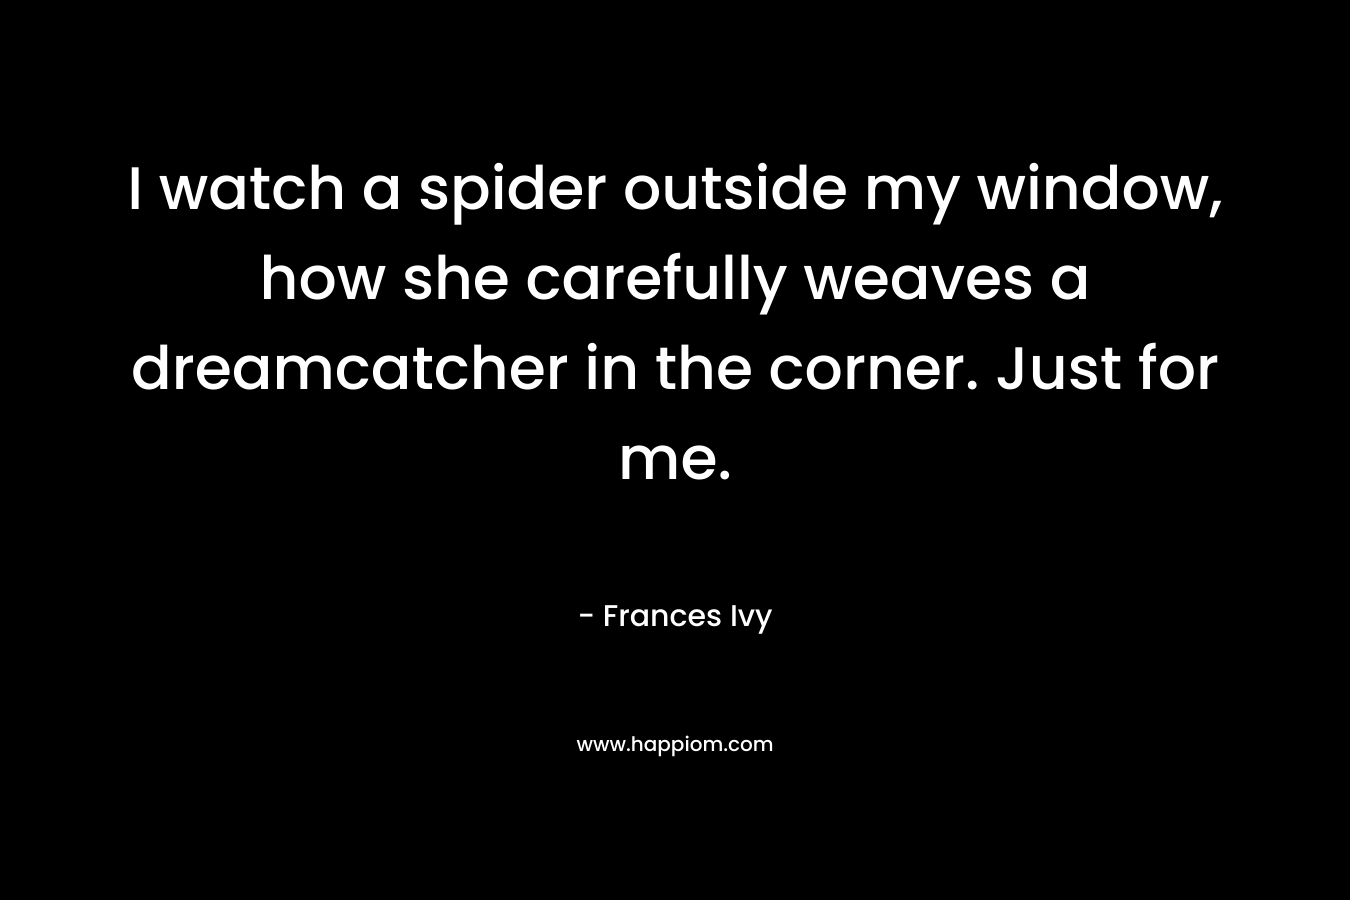 I watch a spider outside my window, how she carefully weaves a dreamcatcher in the corner. Just for me. – Frances Ivy